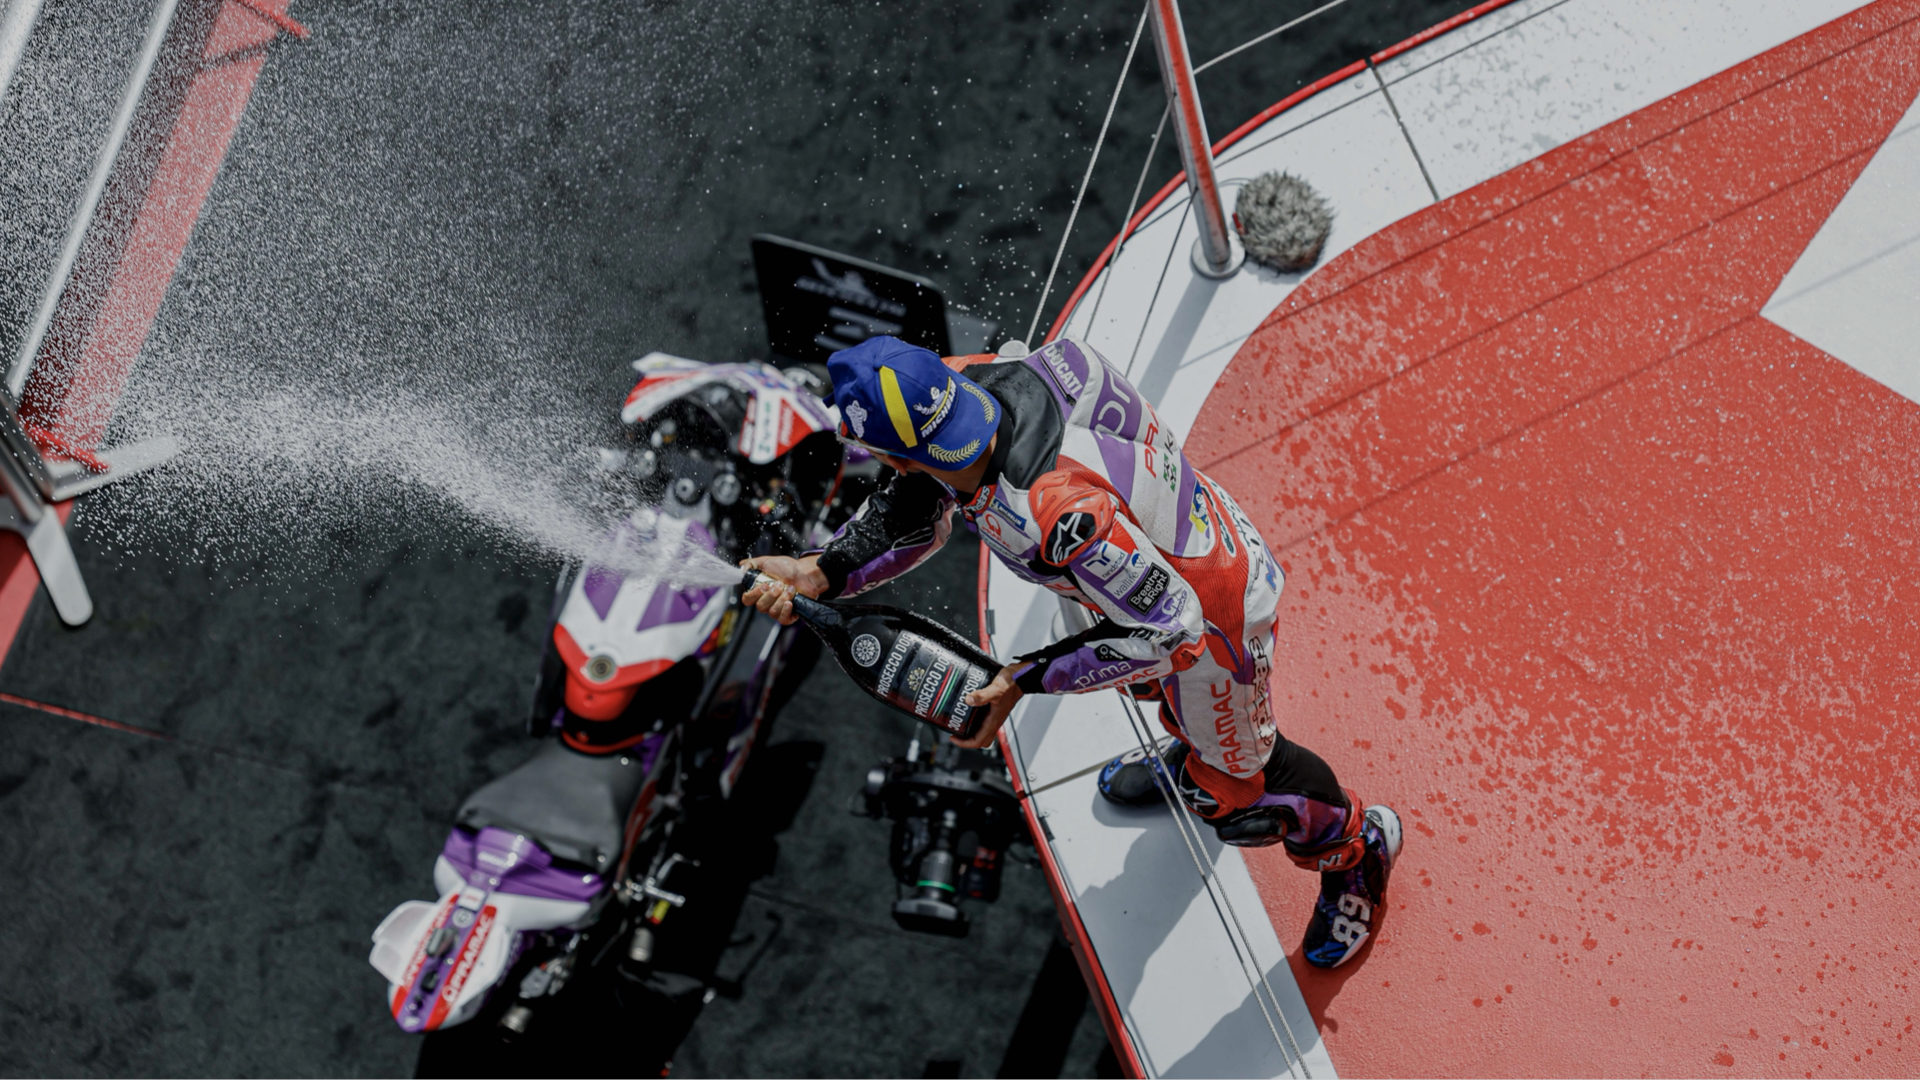 MotoGP: the road to victory